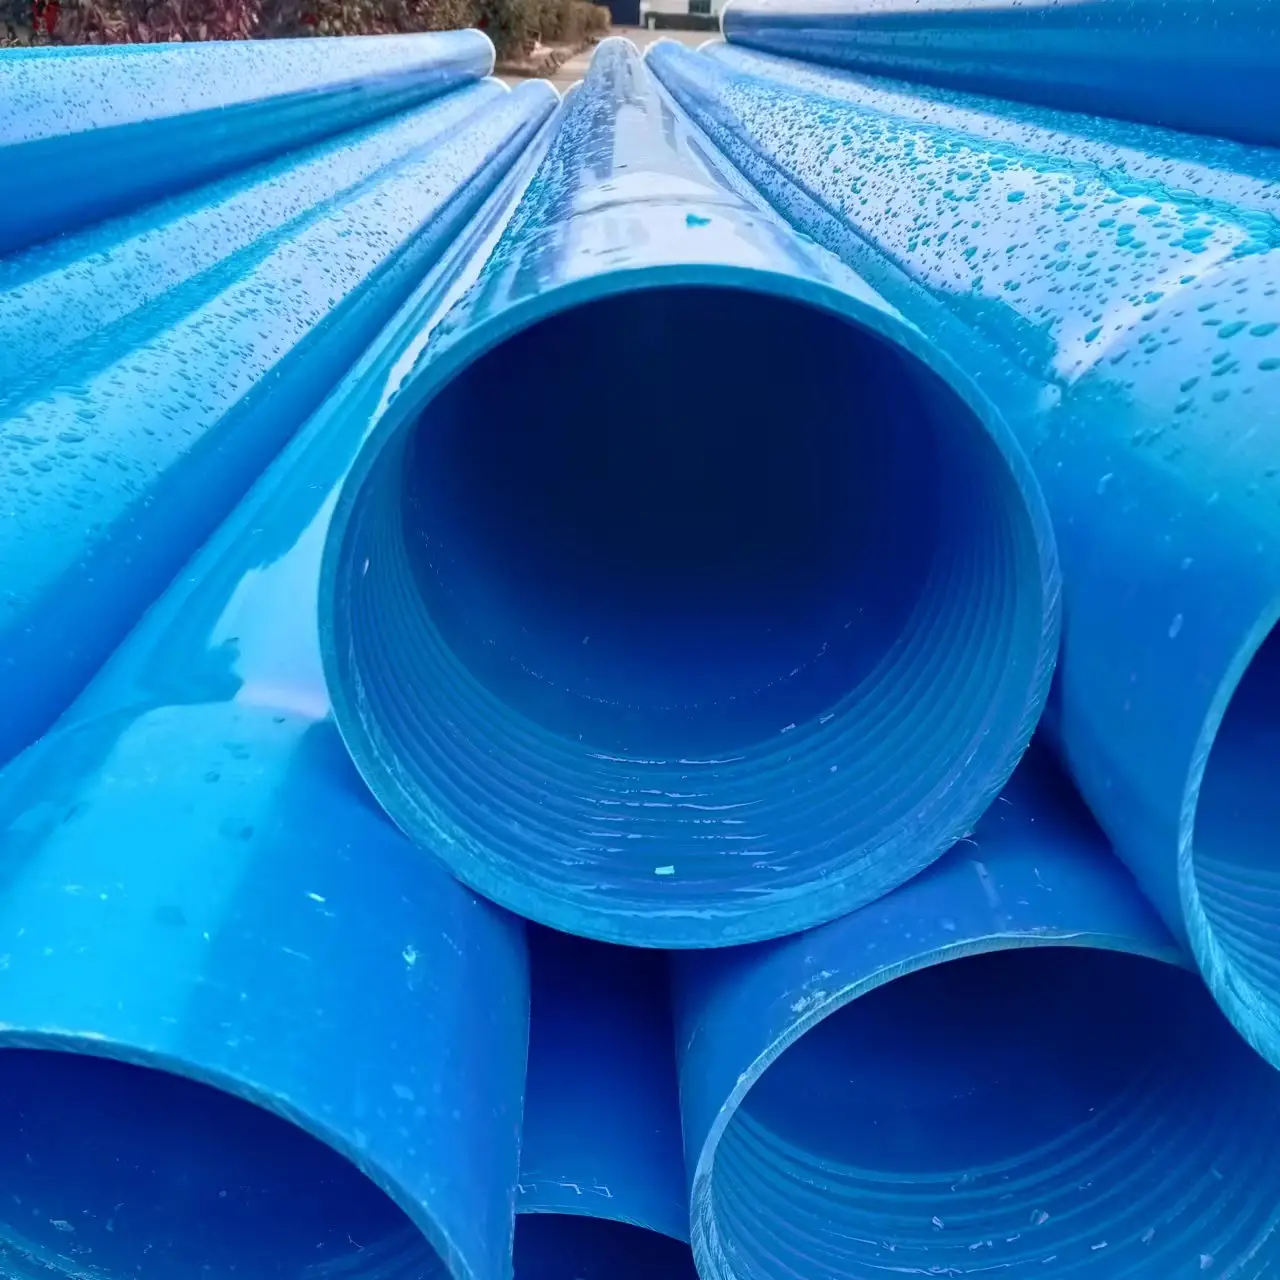 PVC Casing and Riser Pipe 4 5 6 inch bore well threaded 8inch pvc well slot screen tube for irrigation